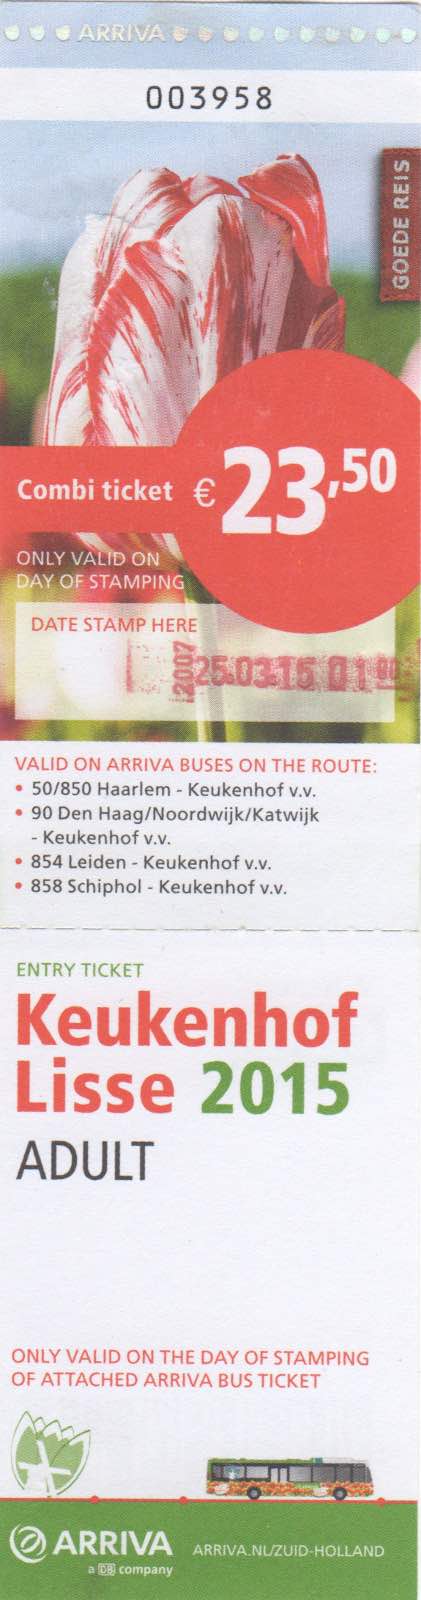 ticket for Arriva bus and entrance to Keukenhof (2015)